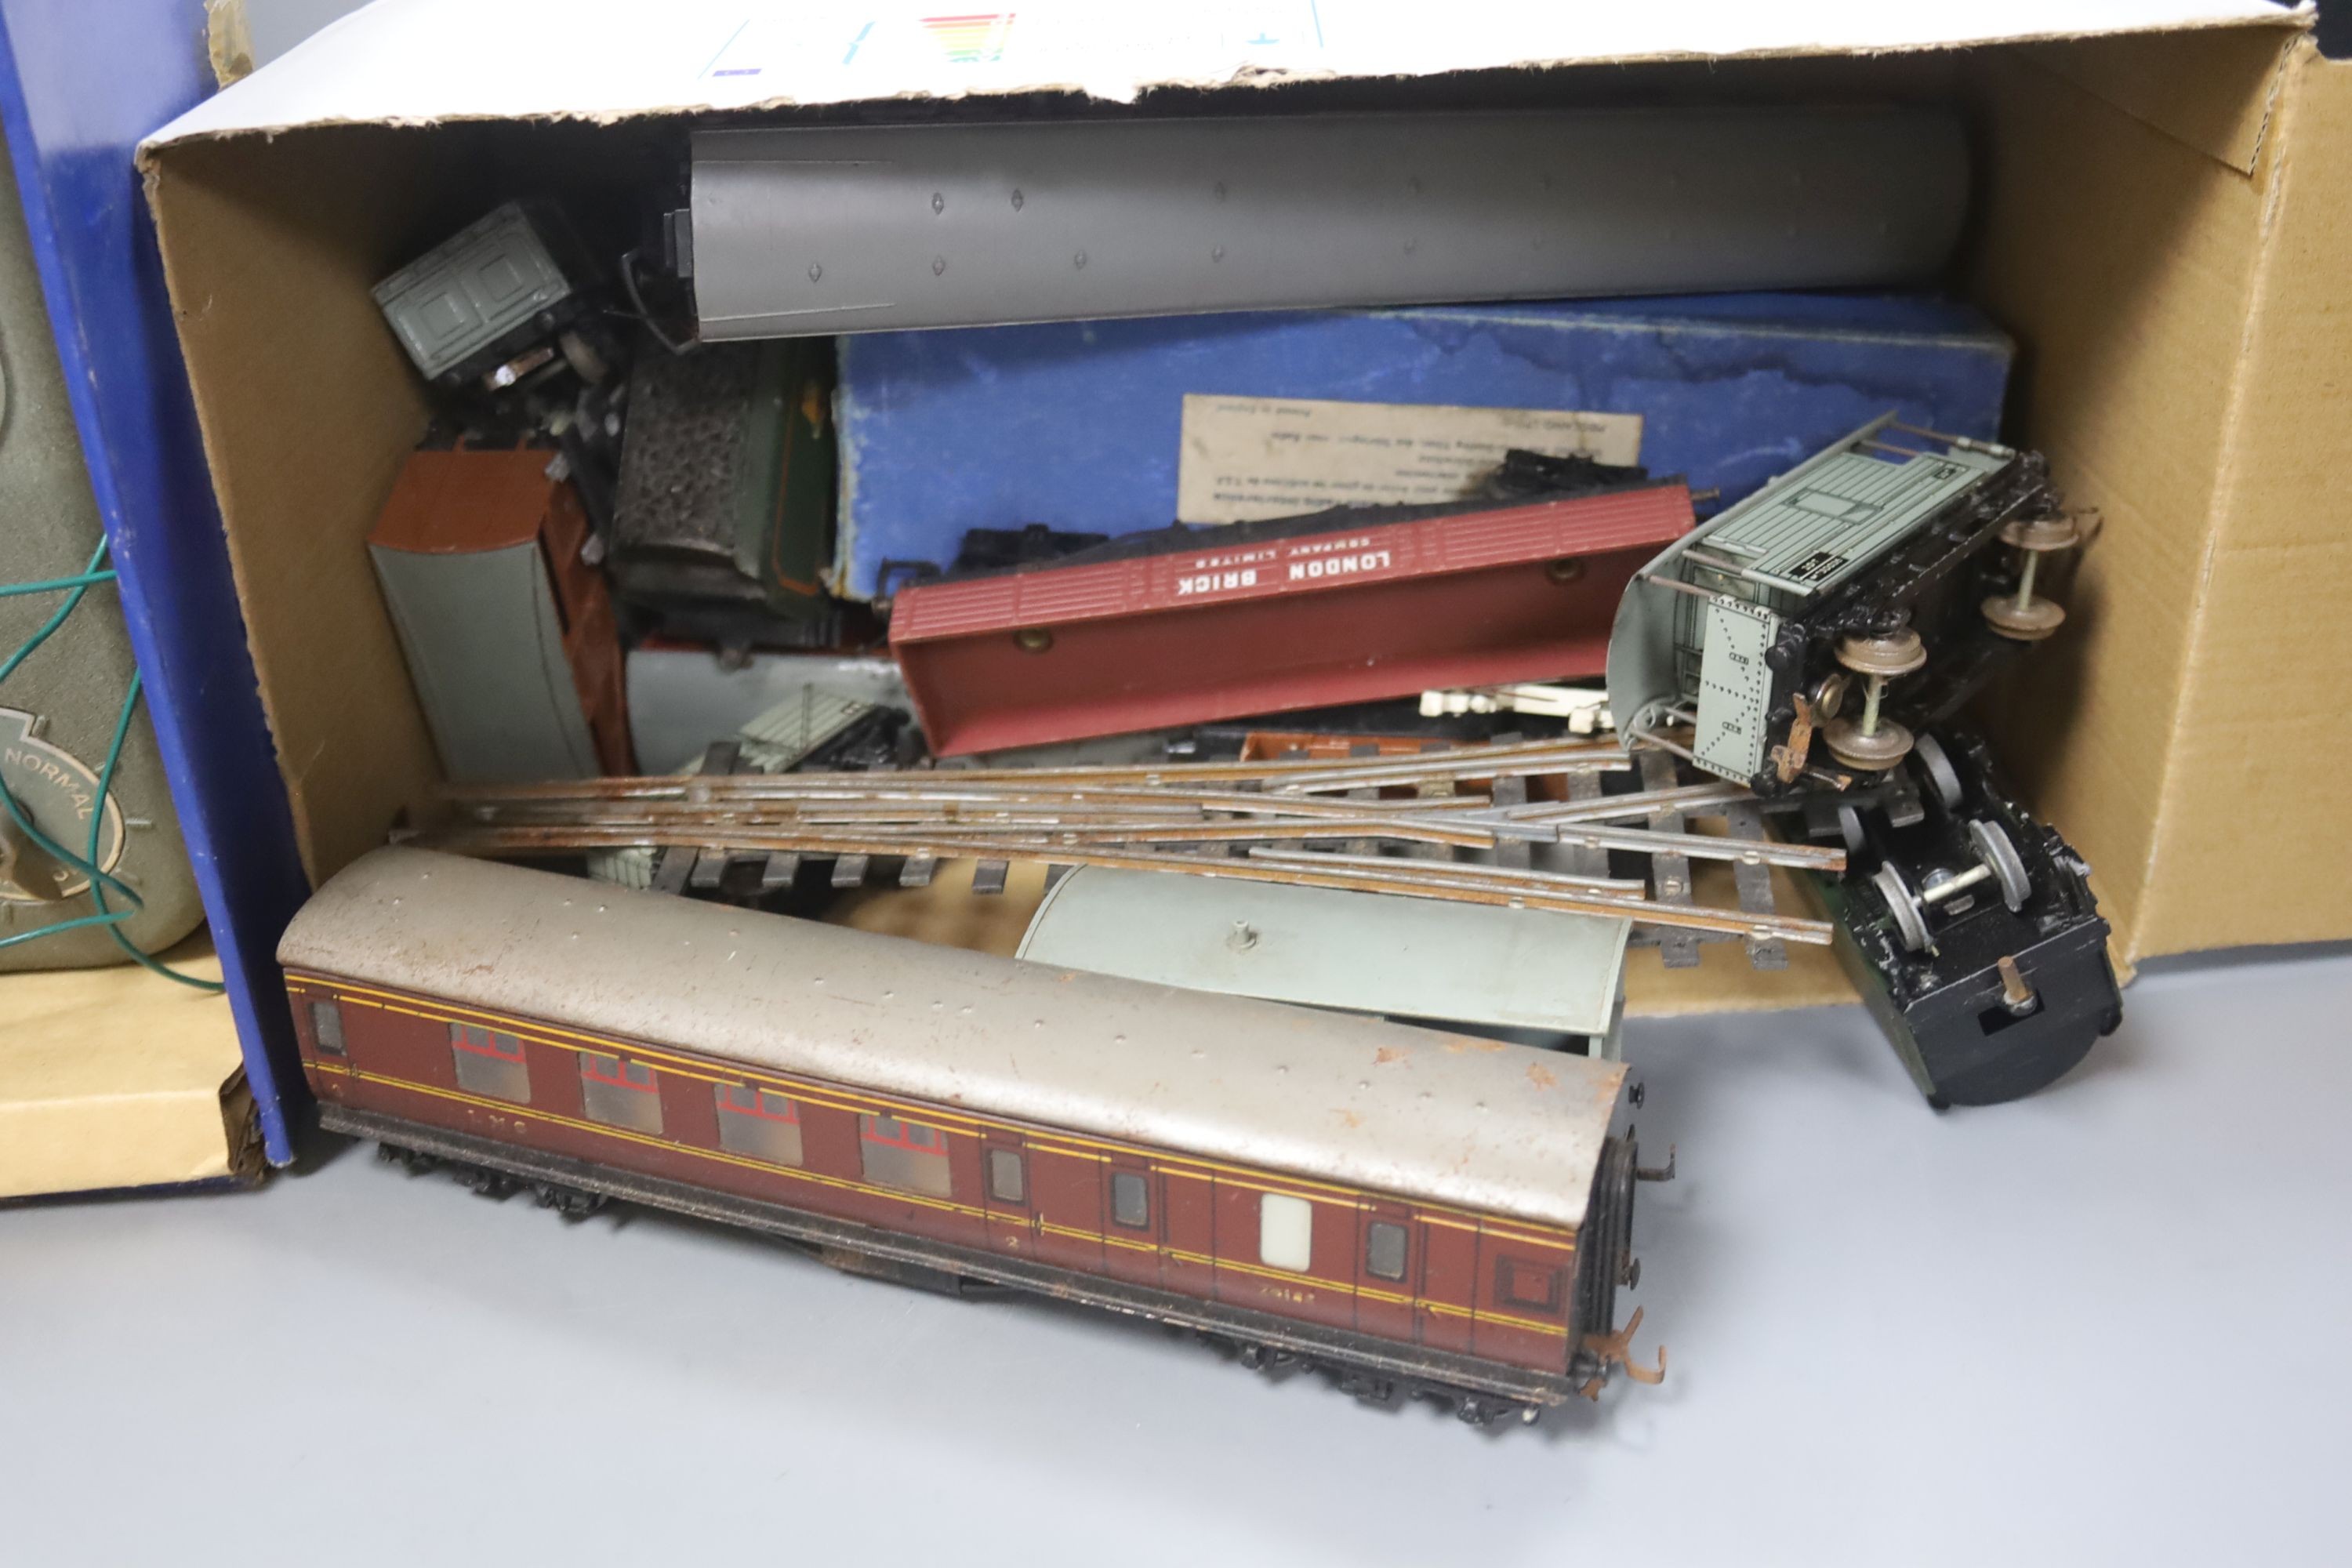 Hornby Dublo collection including Duchess of Montrose locomotive and tender